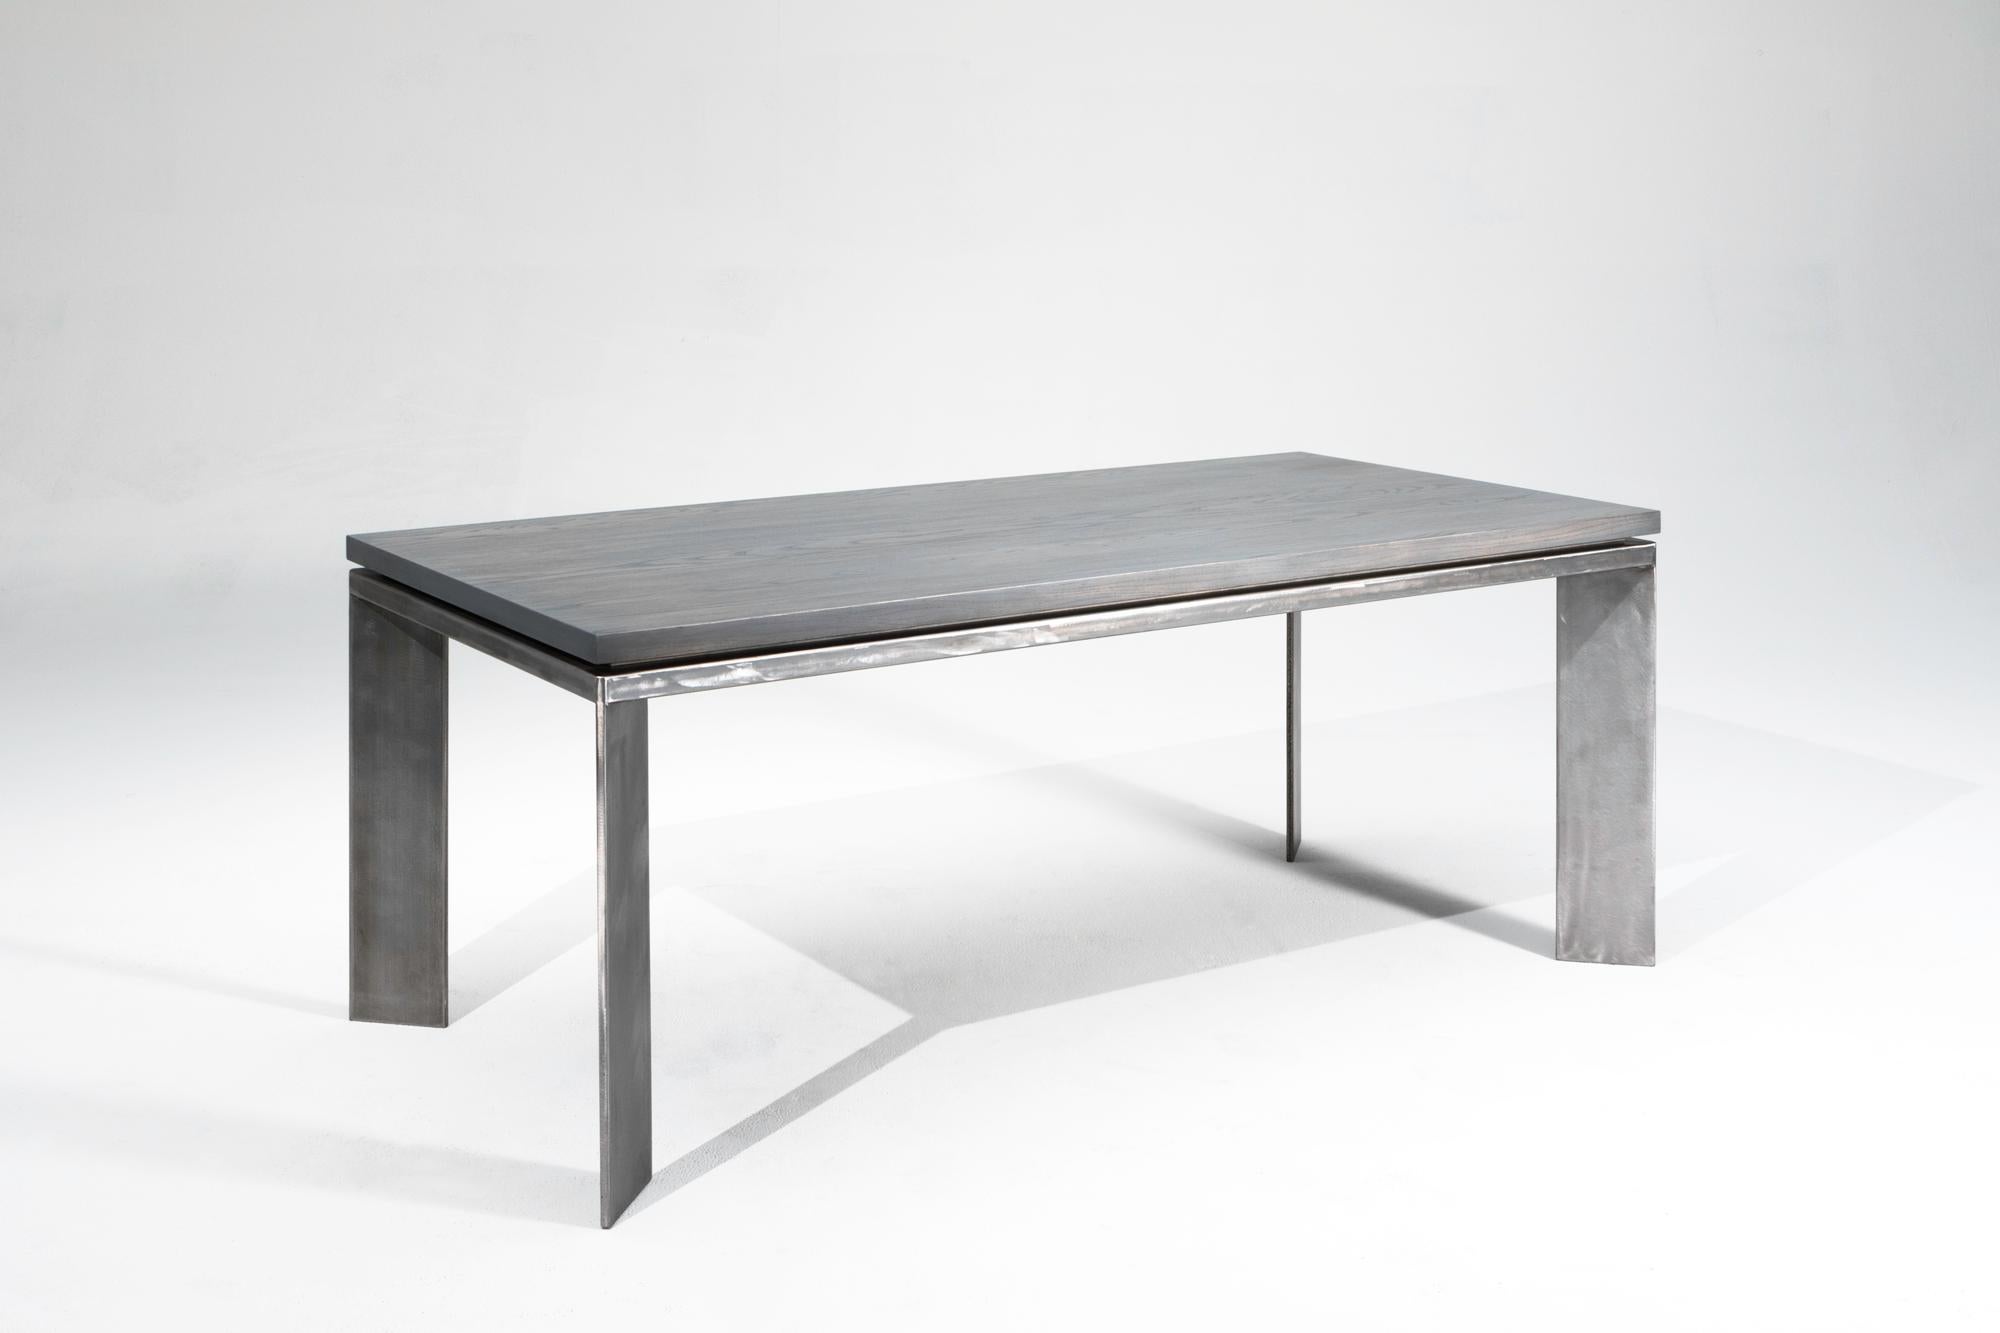 The Charlevoix has a very clean and simple design. It has a solid ash top finished in slate gray to go along with the brushed steel base. The solid top is elevated above the base slightly to create a floating effect and add to the modern design of